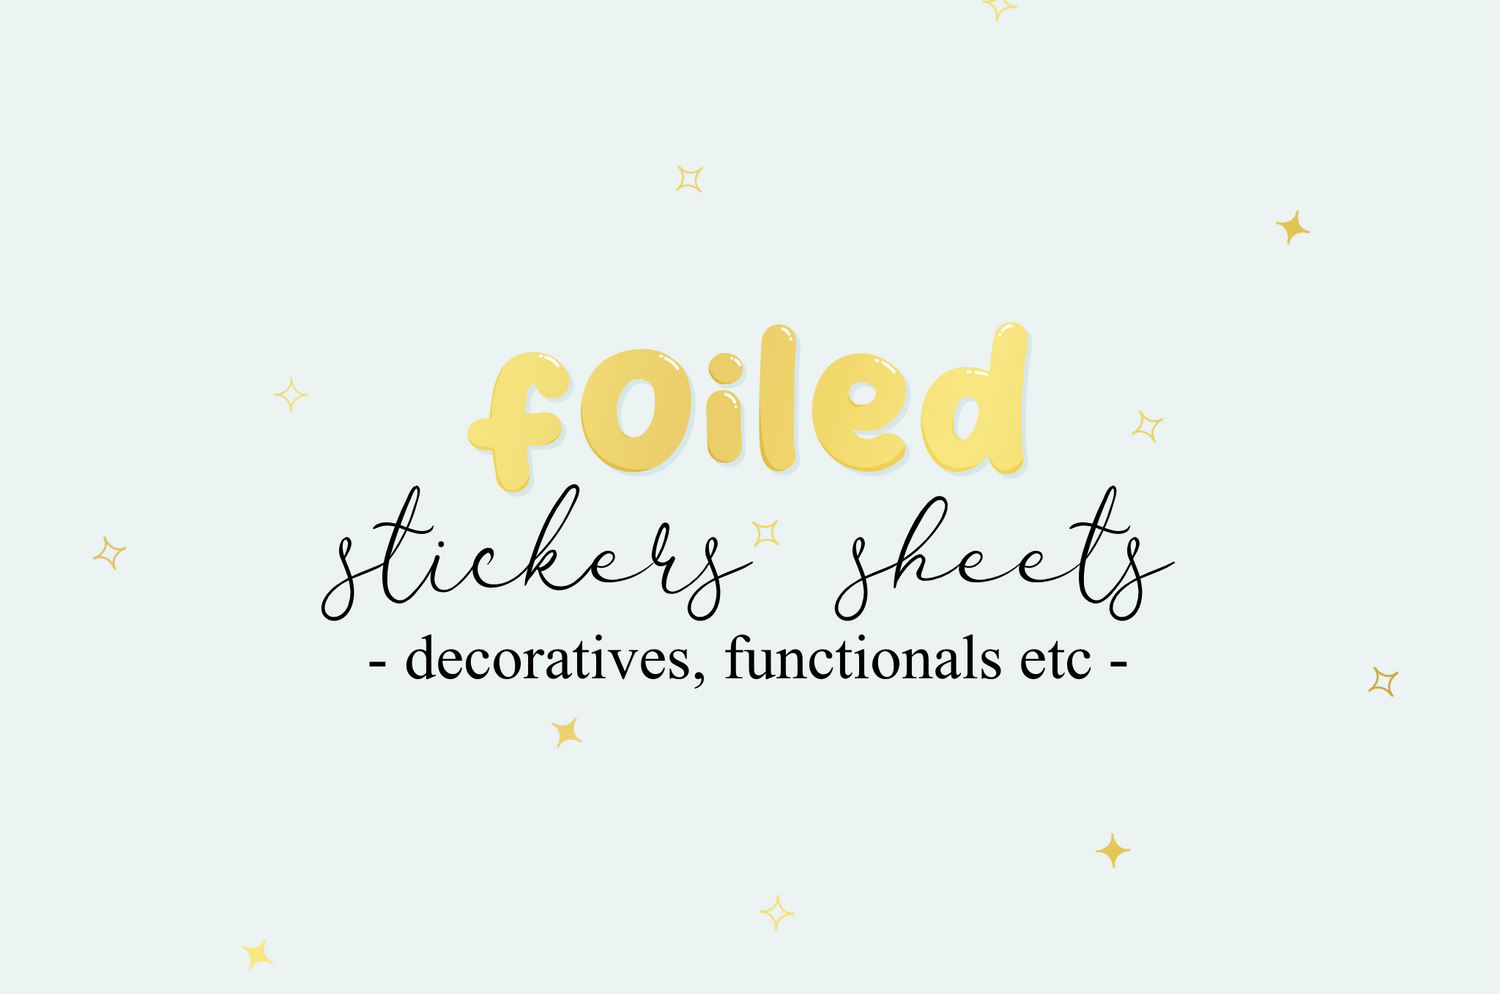 Foiled Stickers Sheets